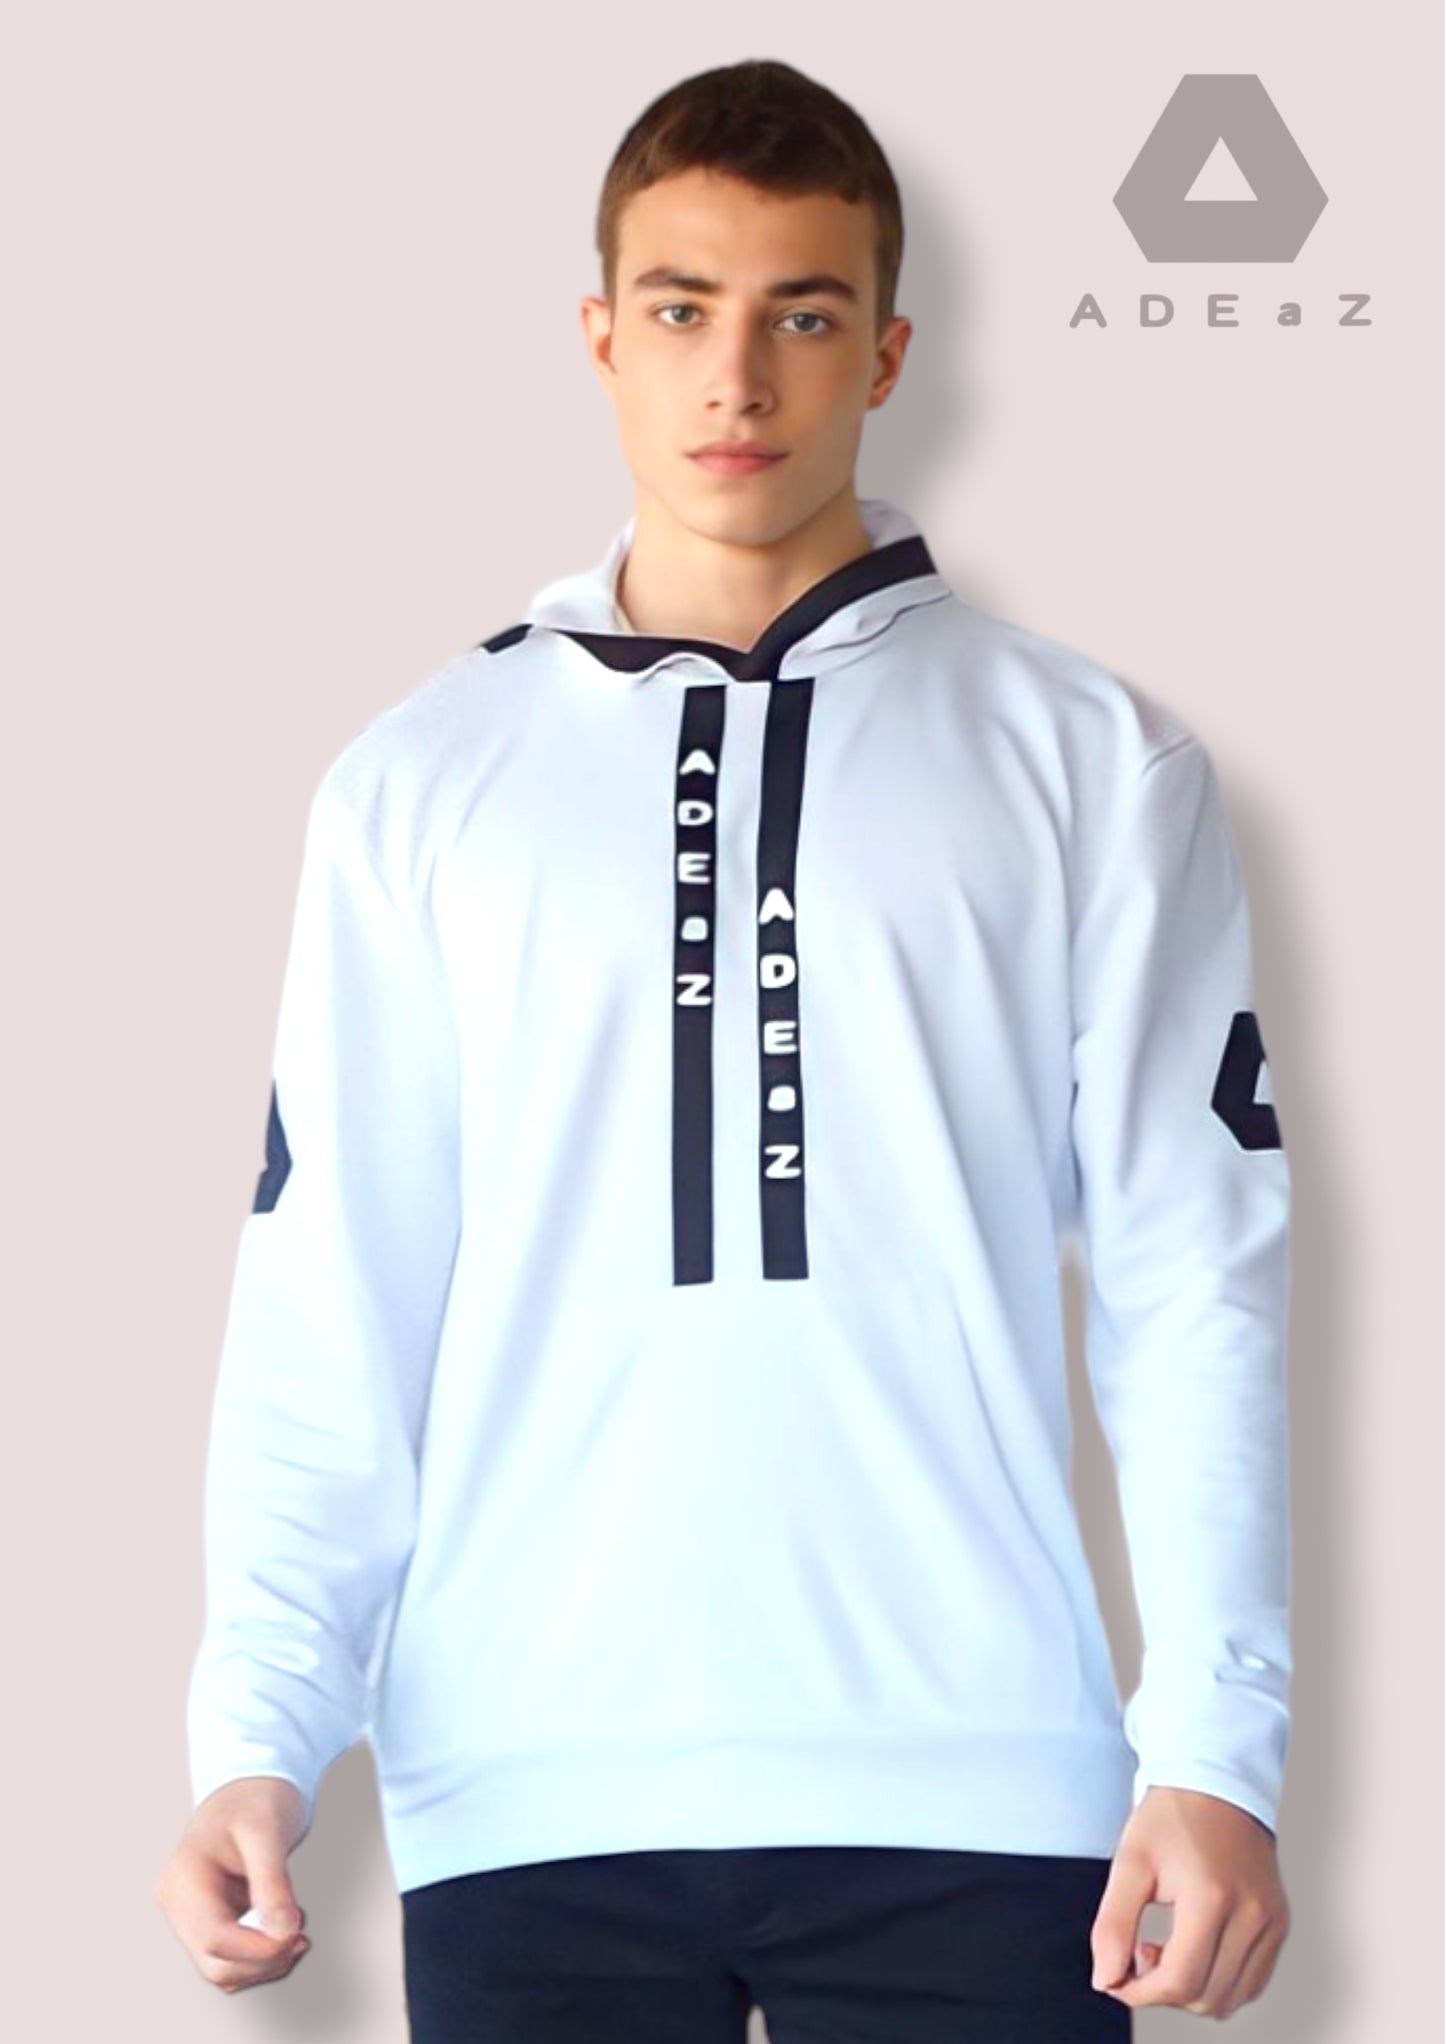 Men's Fashion Hoodie with Stripe: Trendy hoodie for men with a fashionable stripe accent.